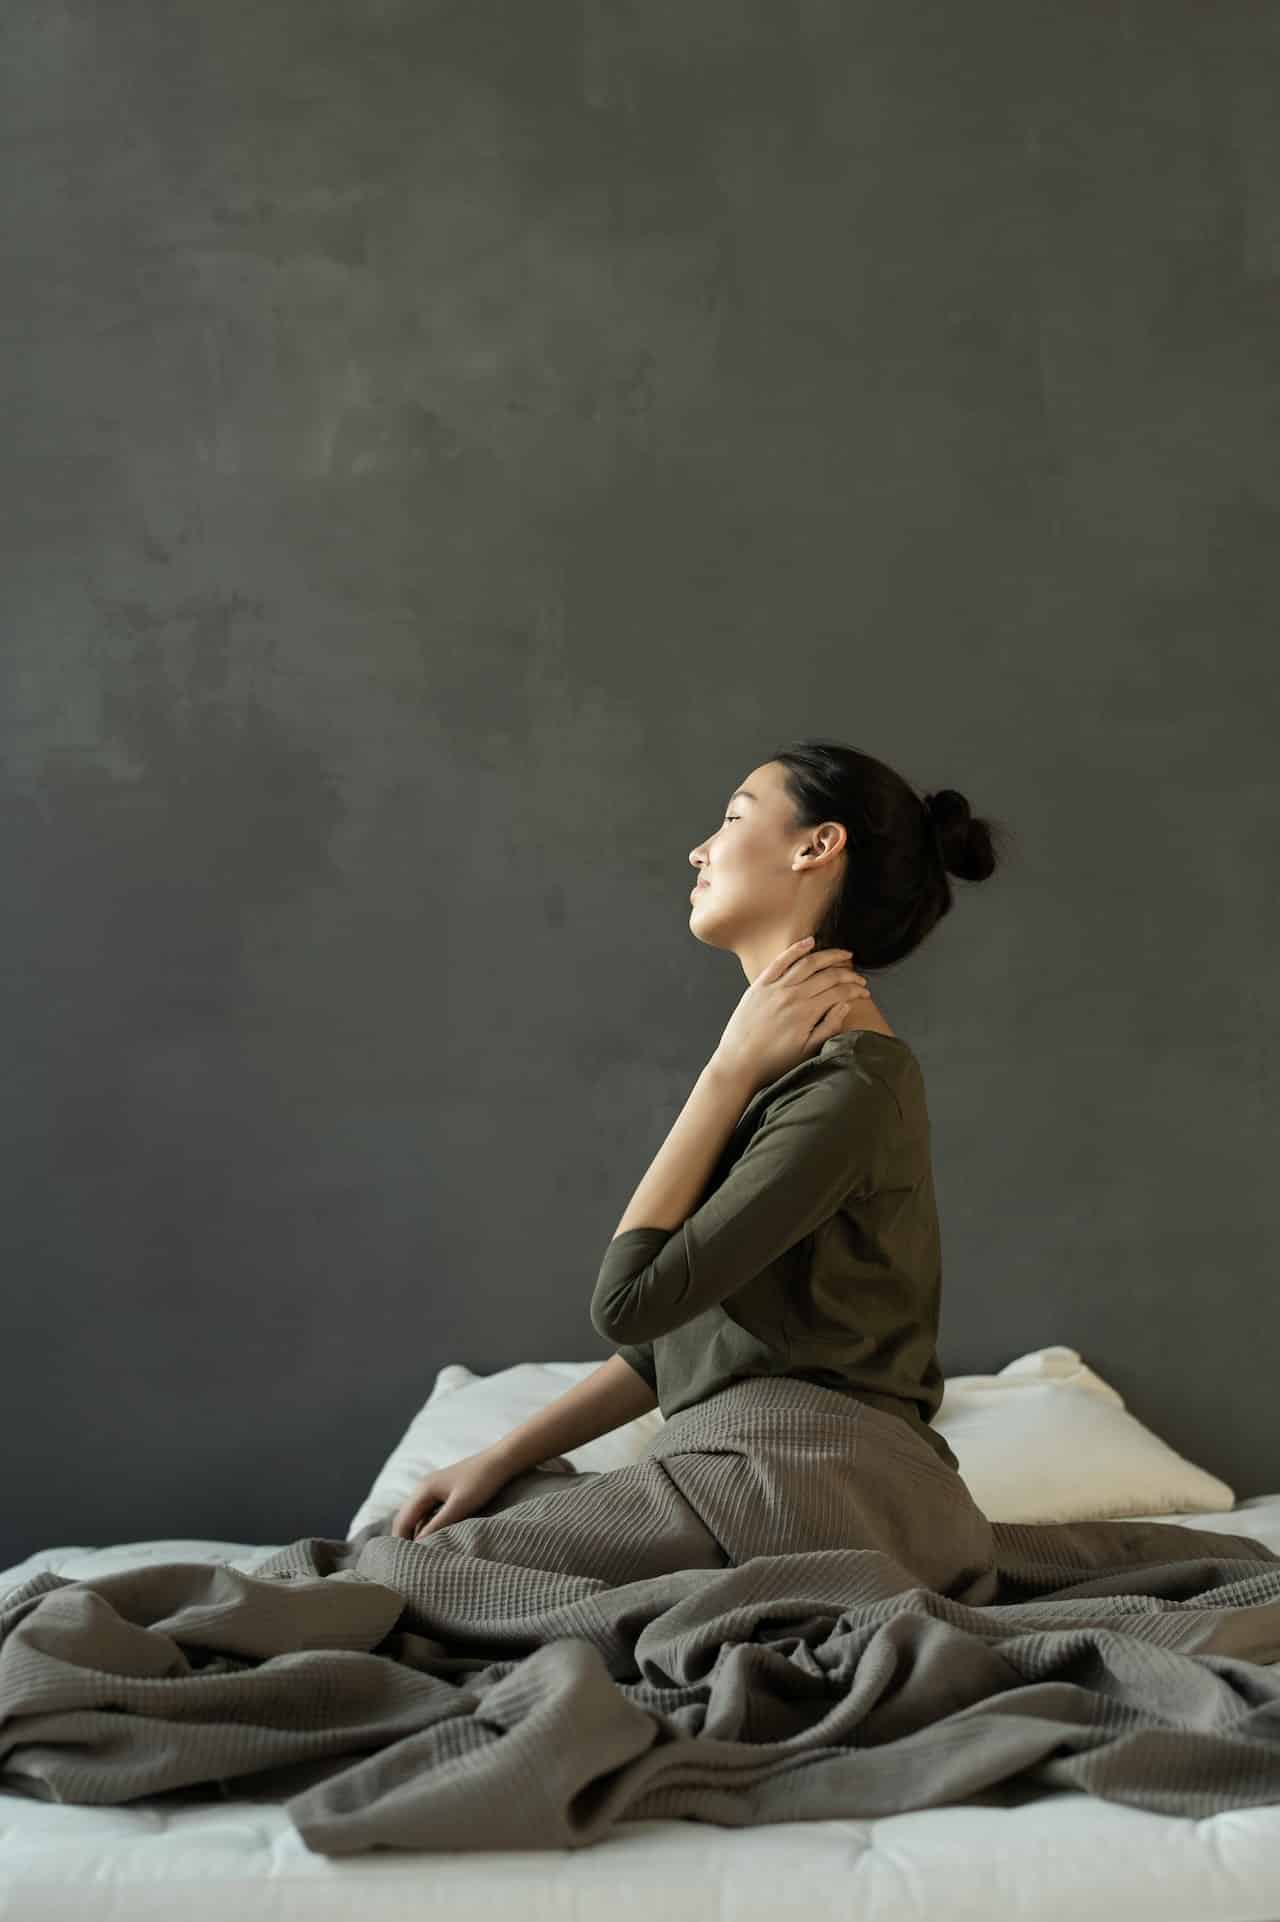 An asian american woman sits up in bed. Turning away from the camera, she is stretching her neck as though to relieve muscle tension.